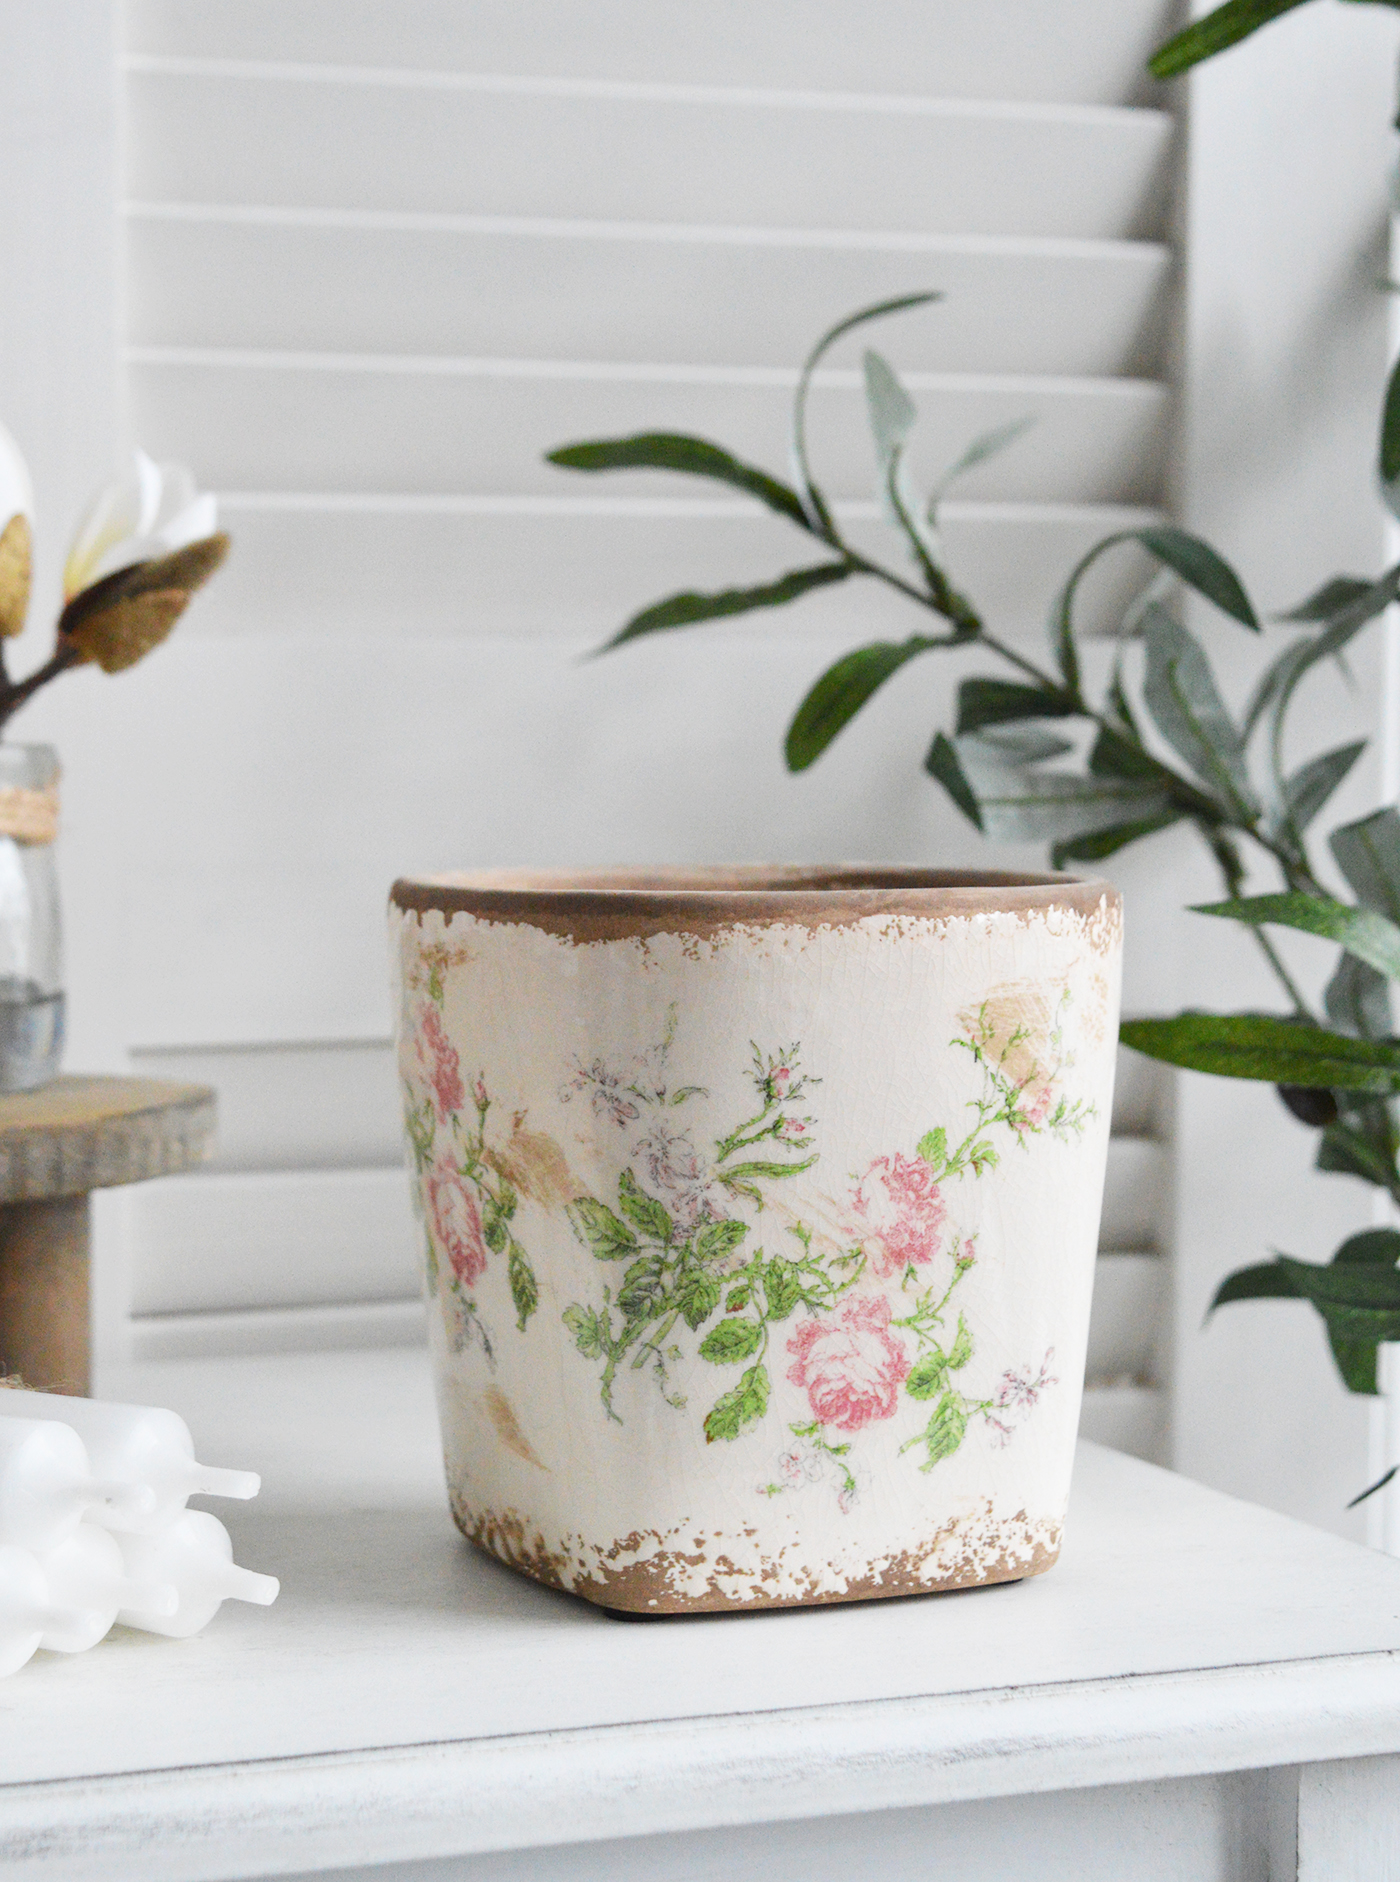 Rosewood Ceramic Pot - New England, modern country, coastal and modern farmhouse furniture and interiors